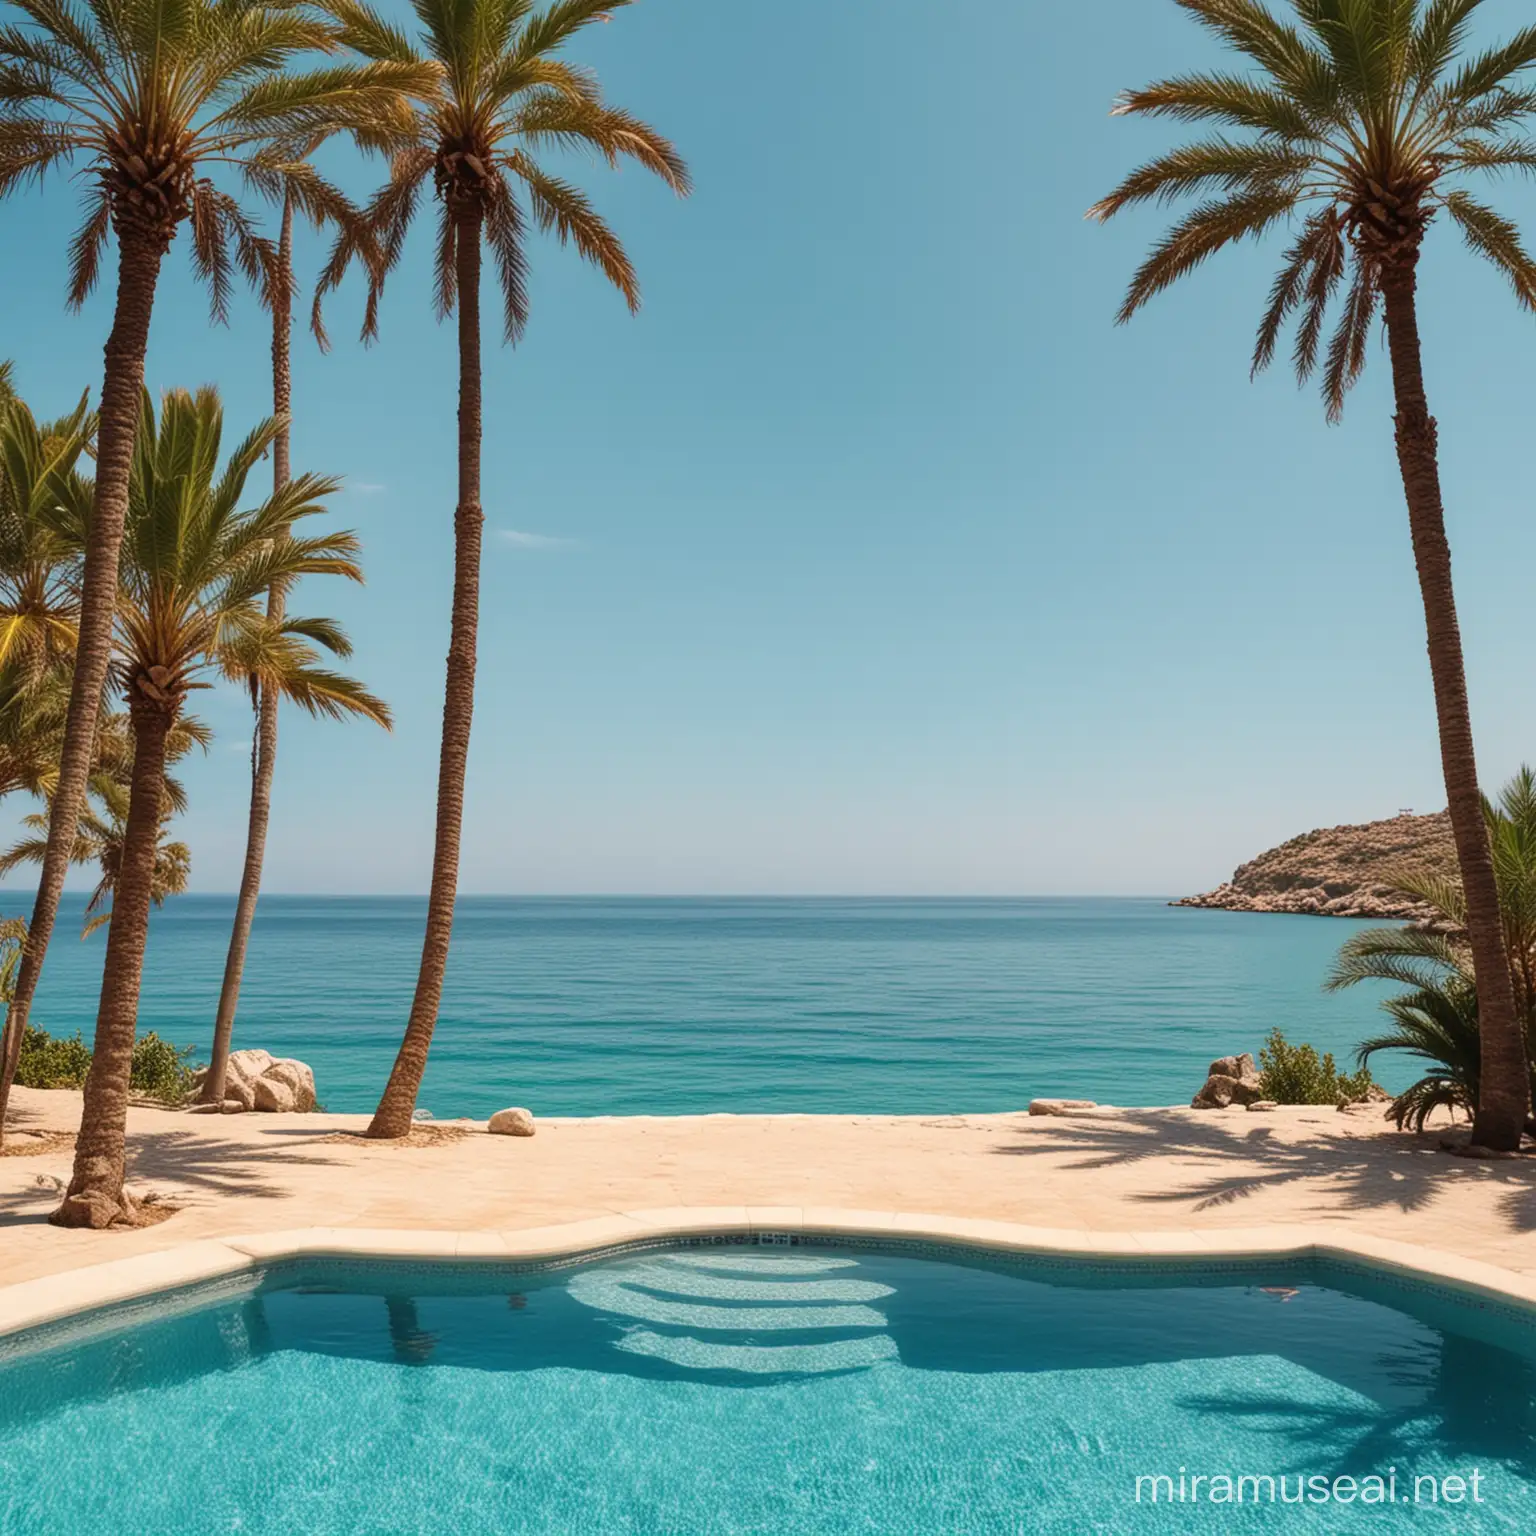 Summer Pool Party at a Spanish Resort with Palm Trees and Waves